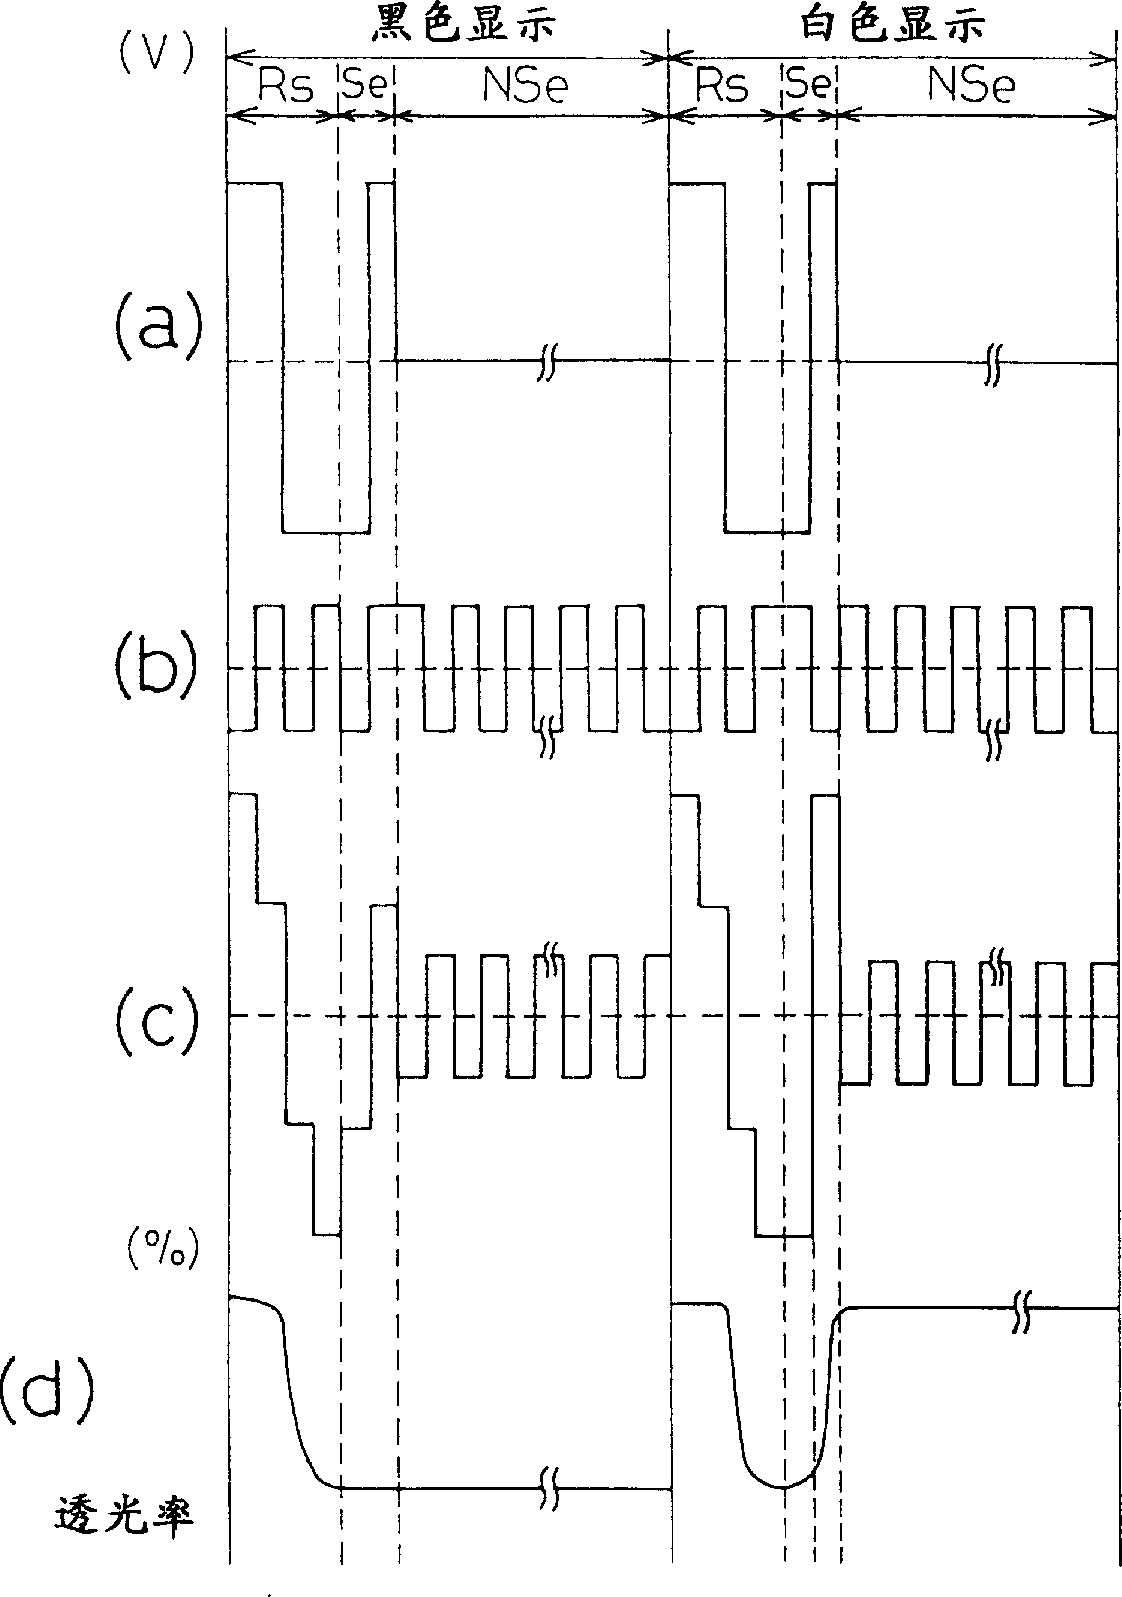 Ferroelectric liquid crystal display, and its driving method